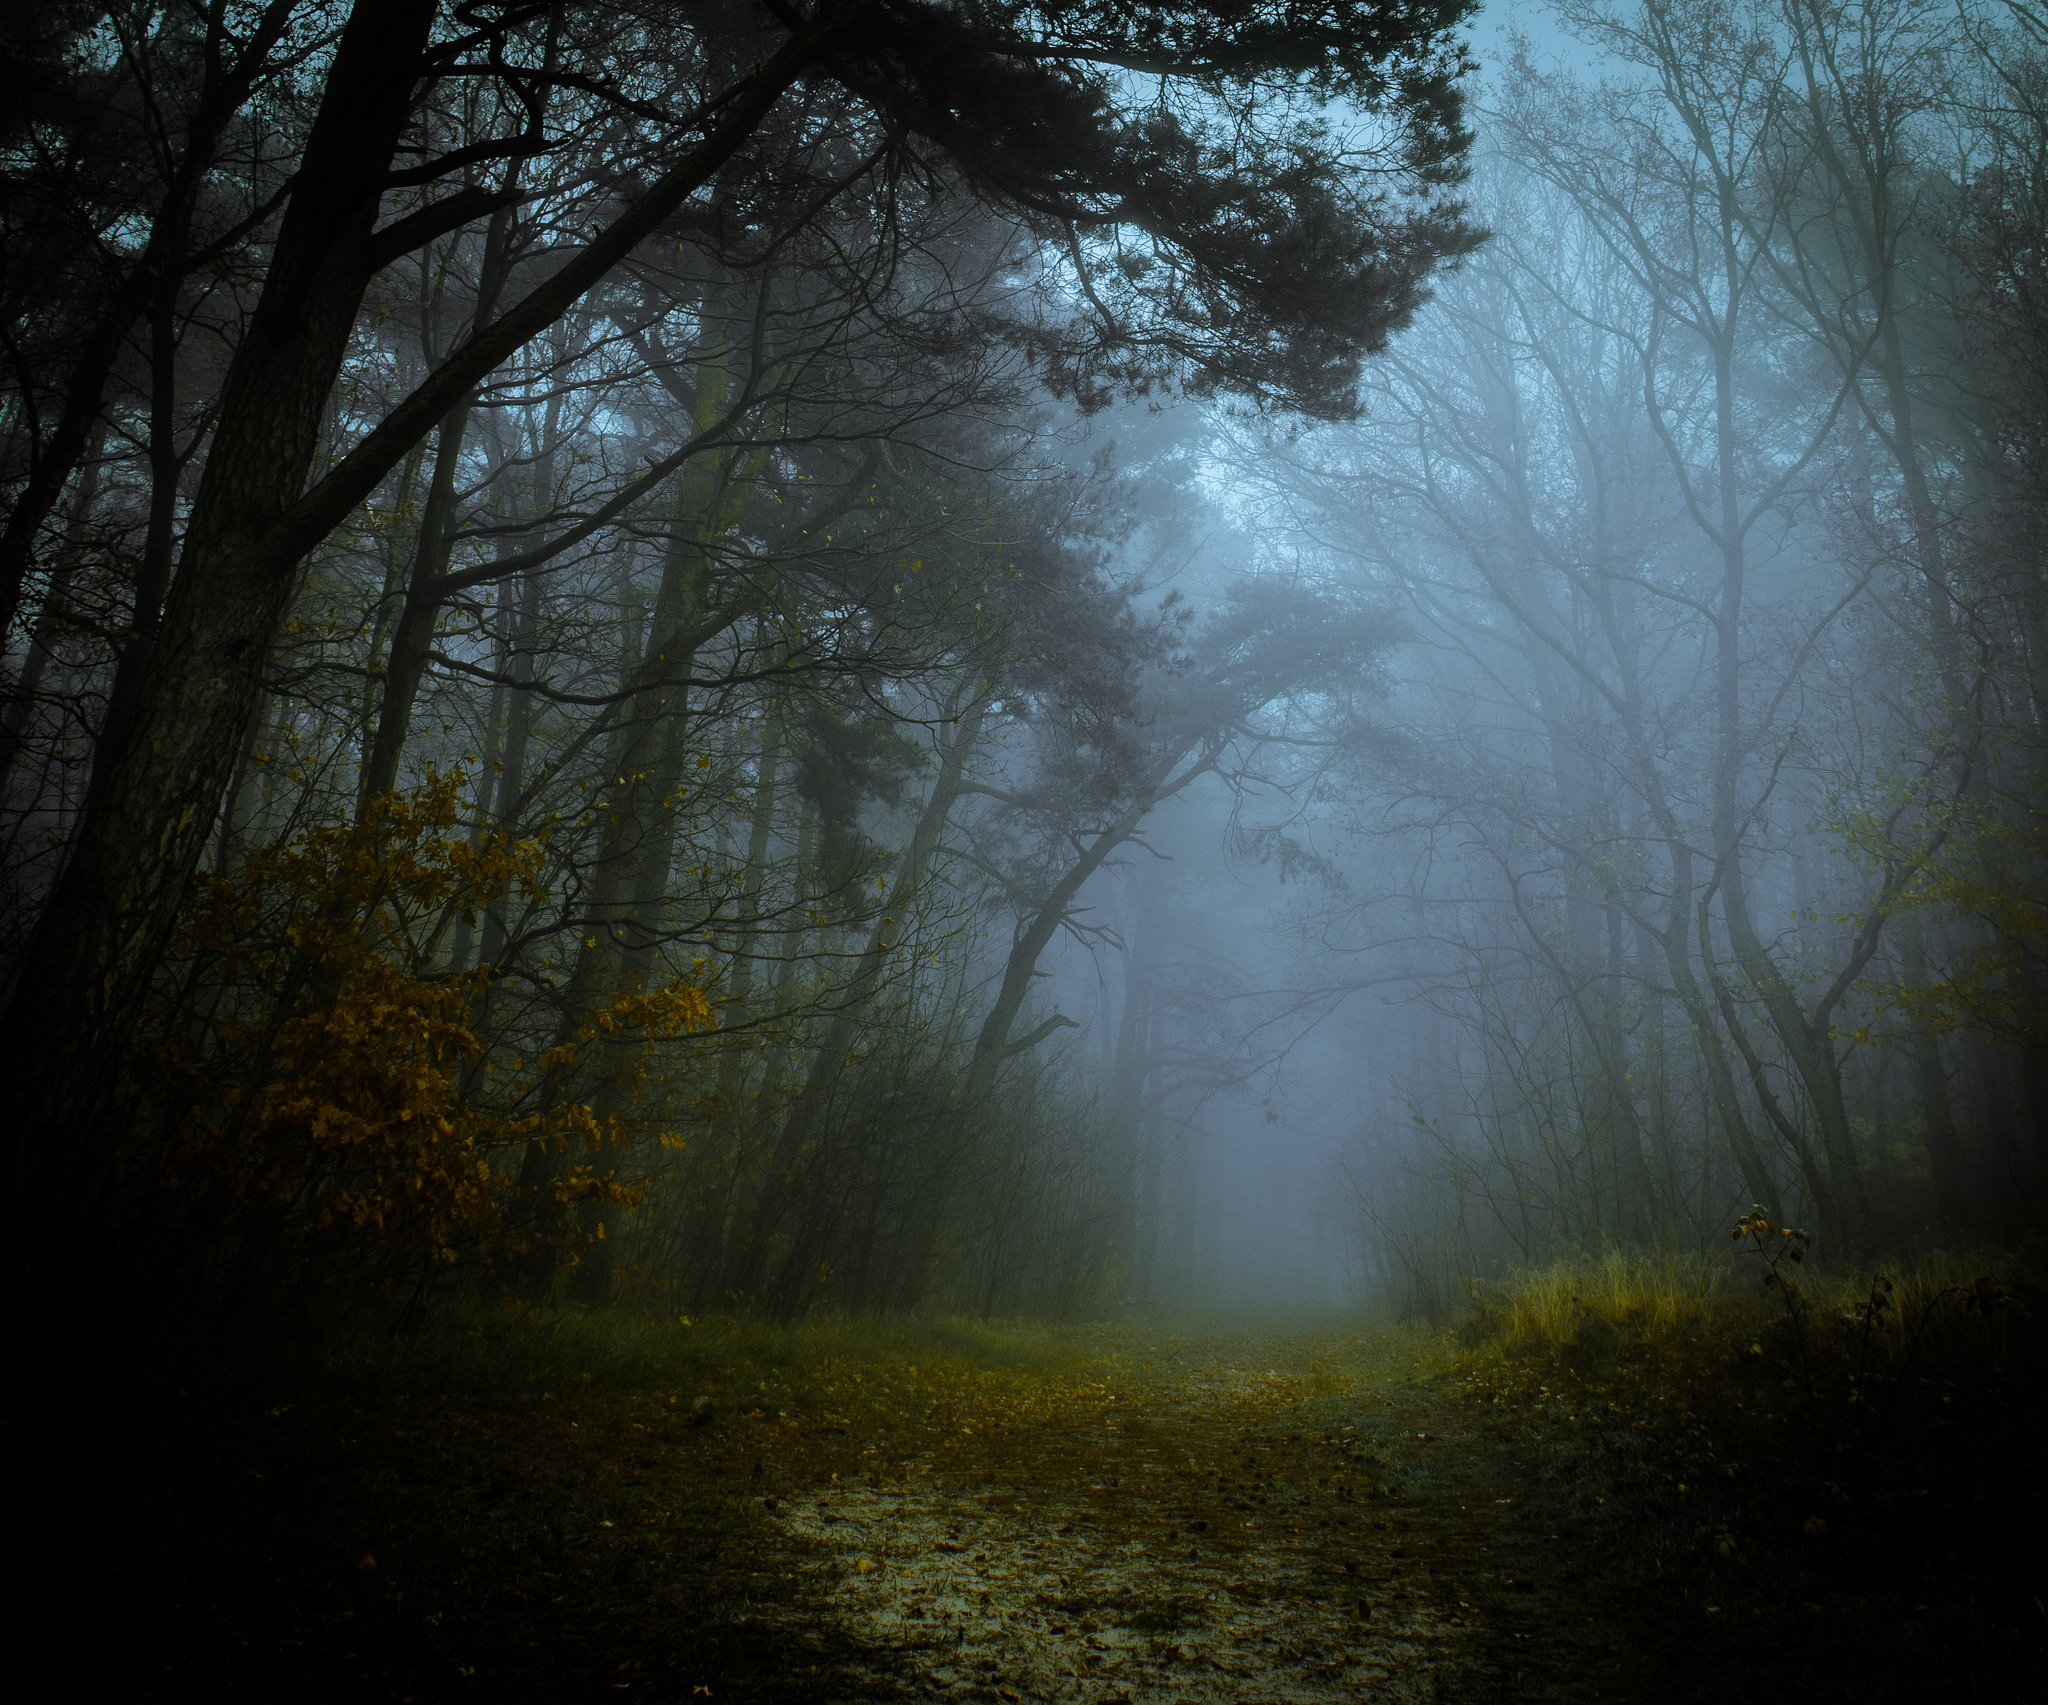  Misty Forest Path  HD Wallpaper Background Image 